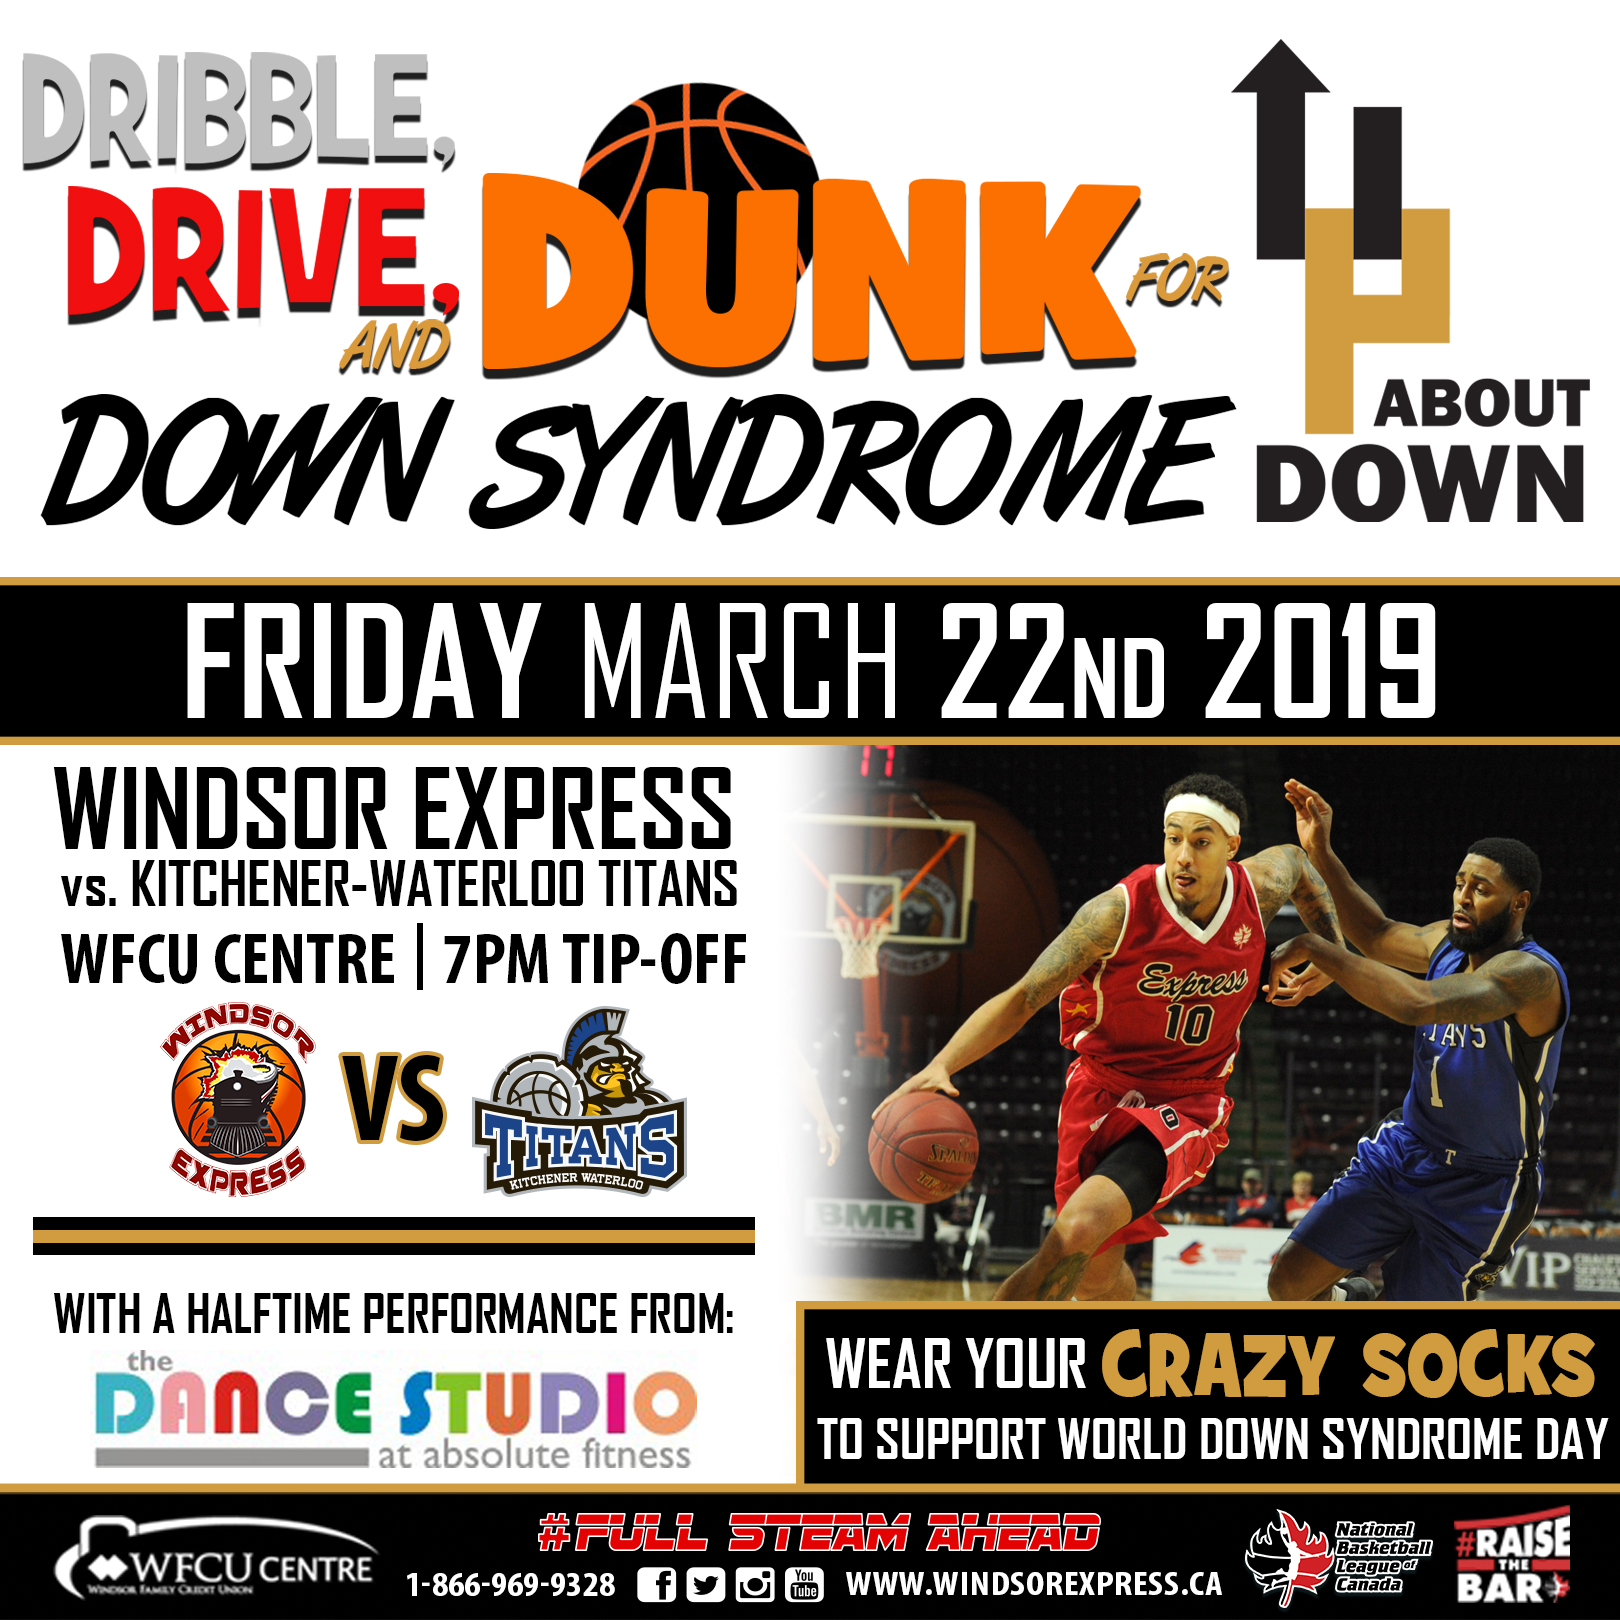 dunk for down syndrome